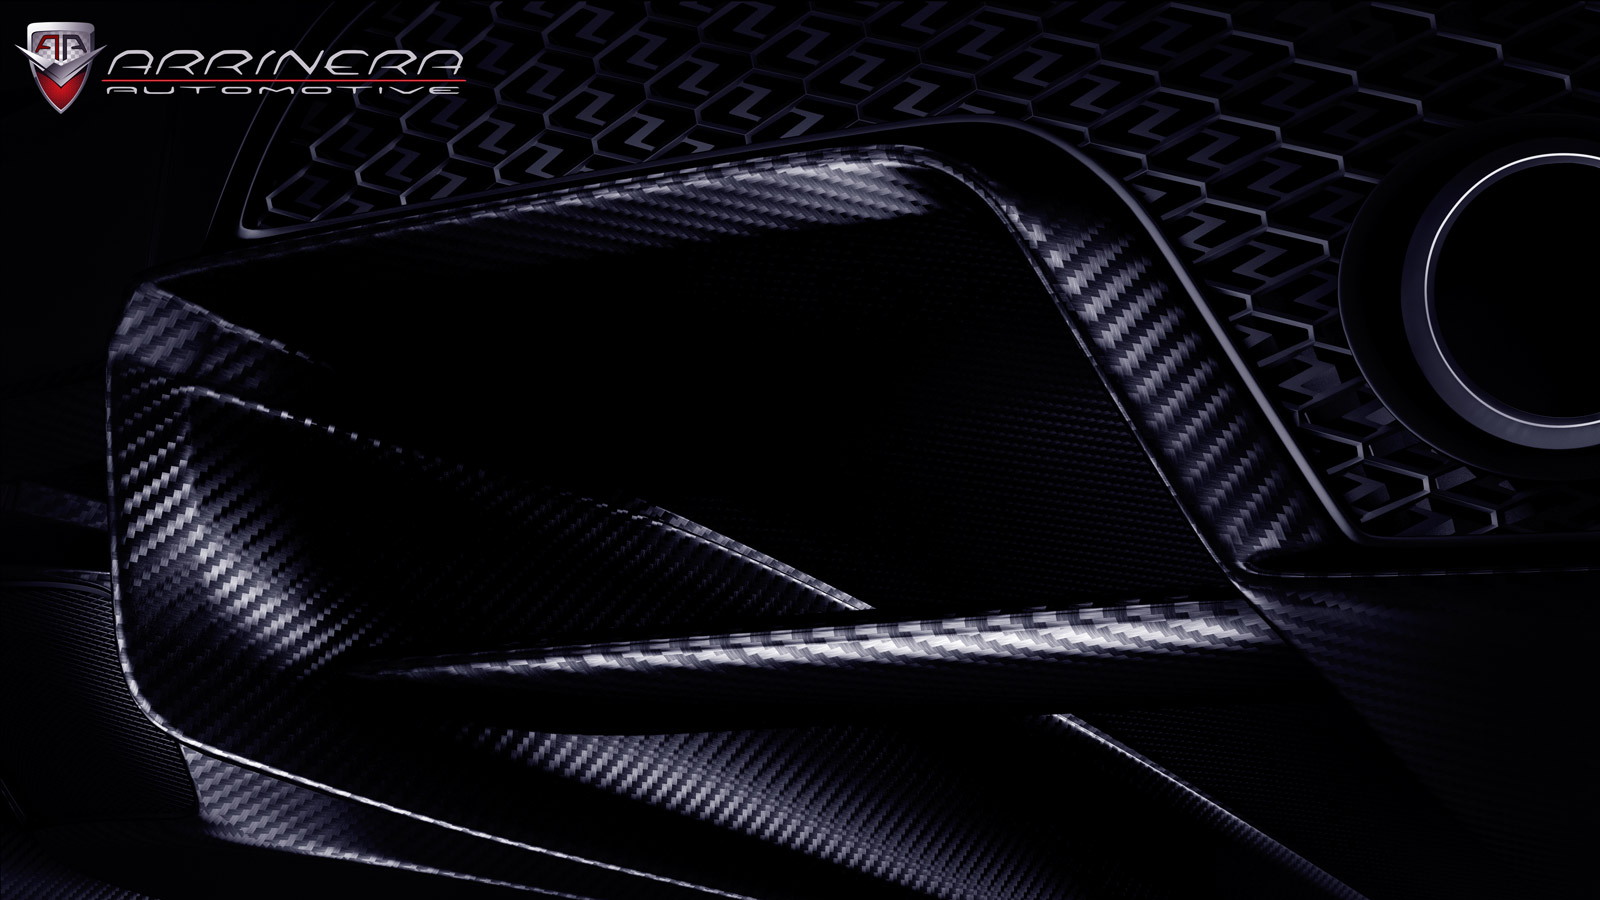 Arrinera Automotive teases a redesign for its supercar project 